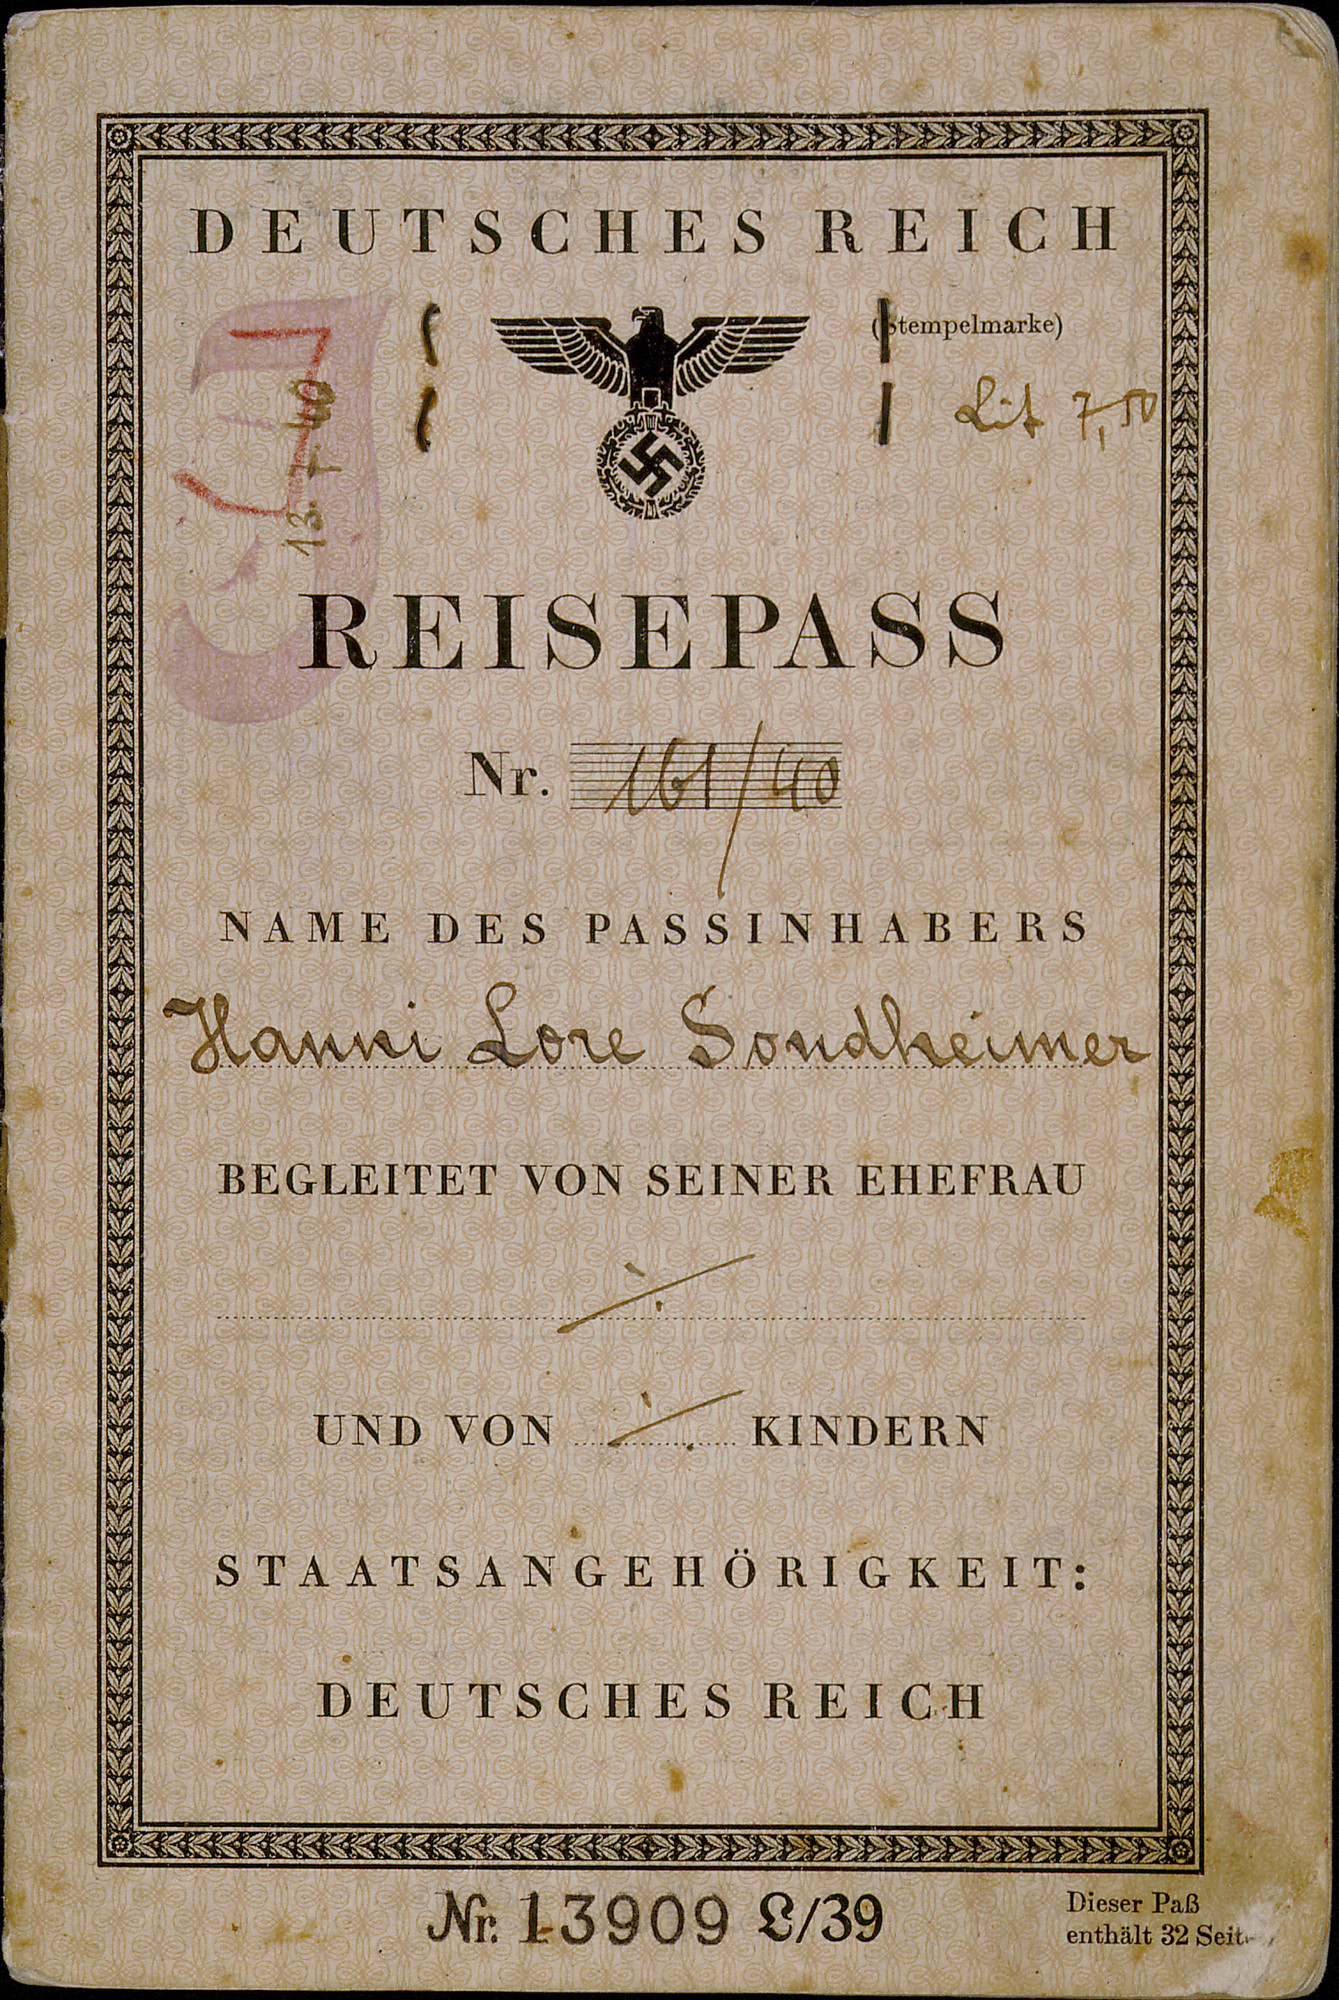 German passport issued to Hanni Sondheimer by the German Consulate in Kovno.

German Jews were commonly required to add "Israel" to their names if male, and "Sara" if female.  Jewish passports were further distinguished by a "J," signifying "Jude" (Jew), stamped in red on the first page.